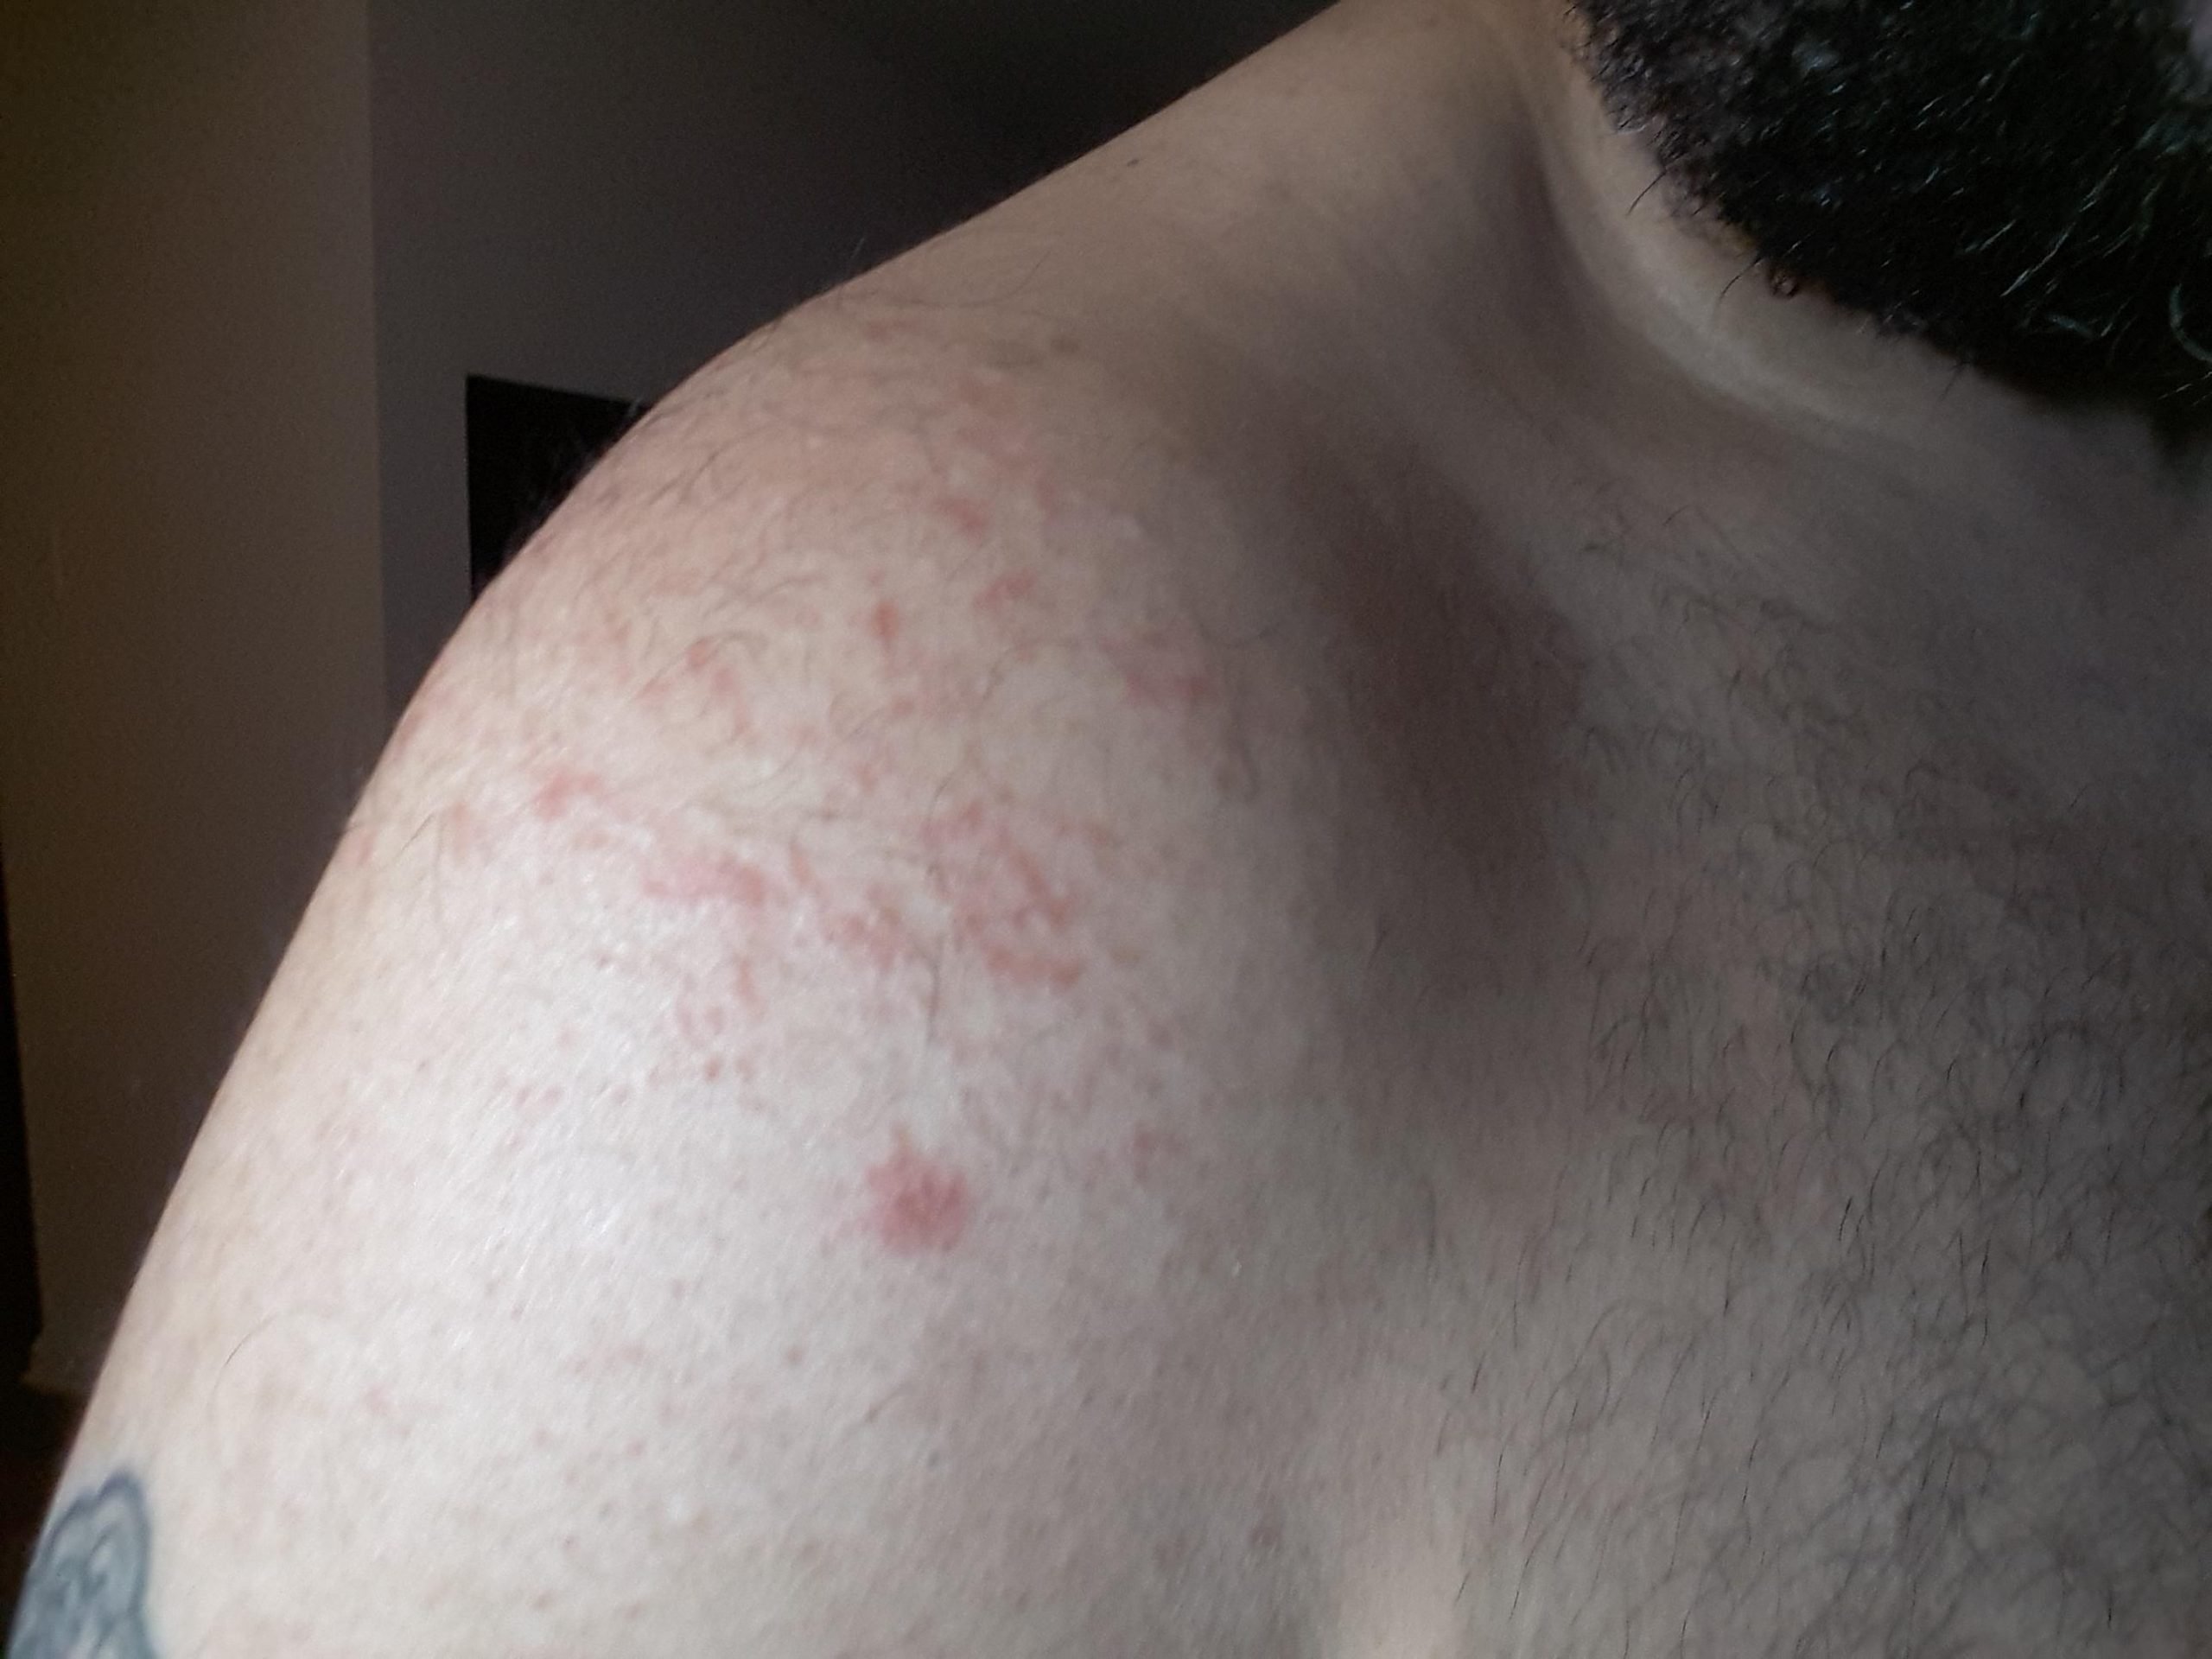 Is this eczema or some type of other rash? (Image) : Accutane